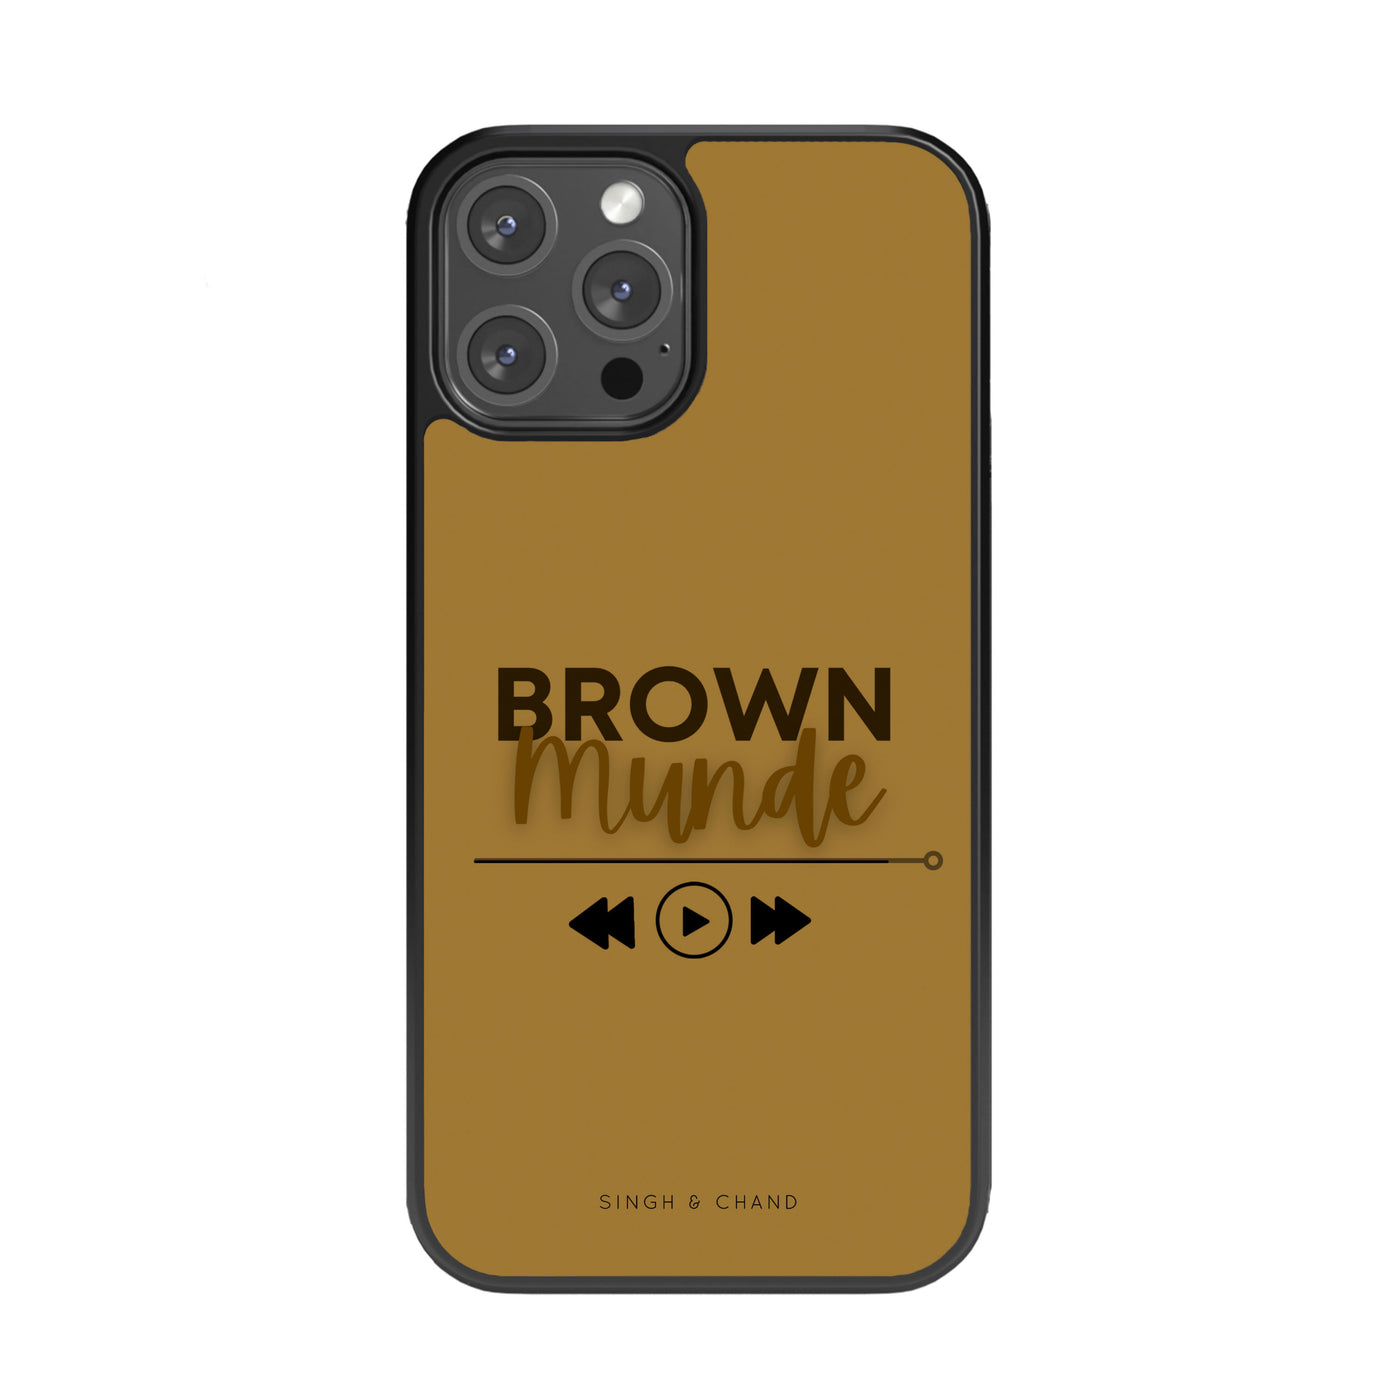 Pause play button BROWN MUNDE Glass Phone Case